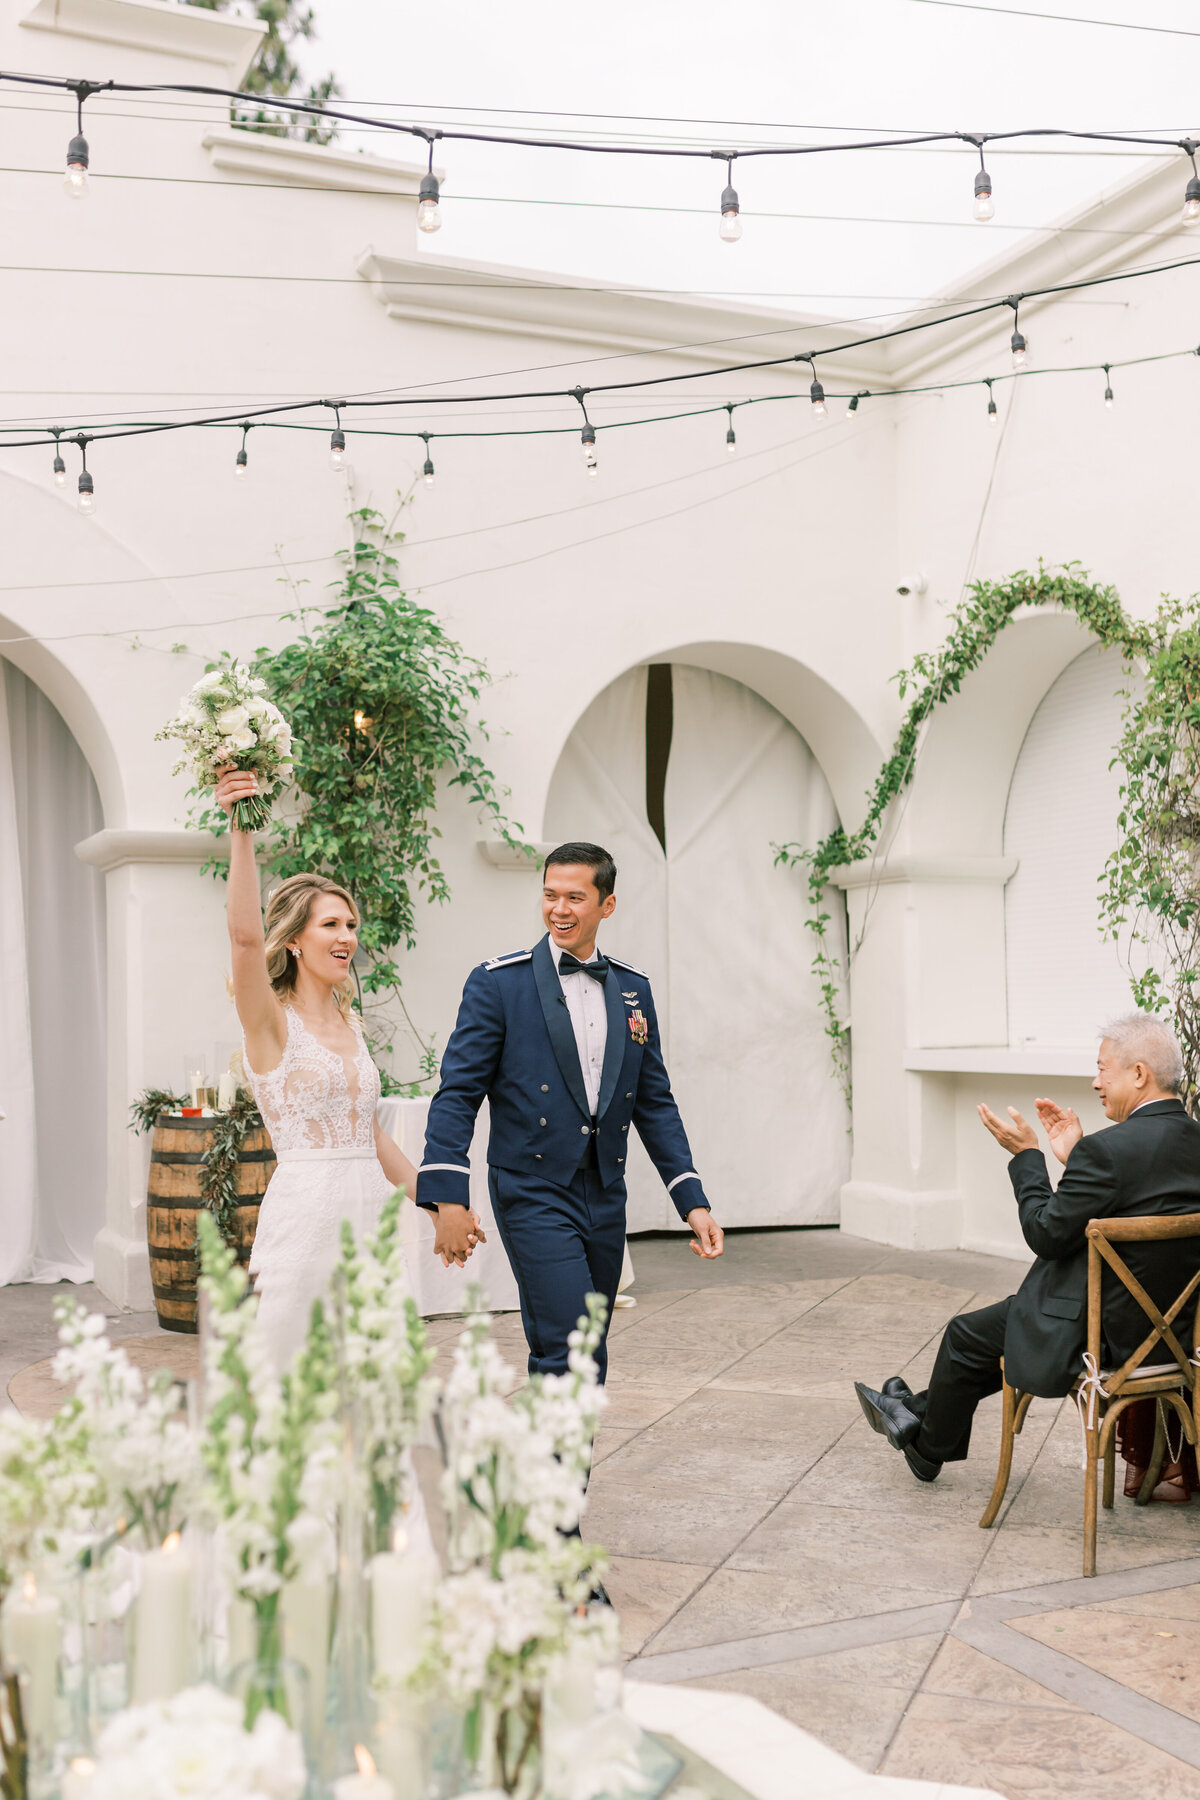 Jocelyn and Spencer Photography California Santa Barbara Wedding Engagement Luxury High End Romantic Imagery Light Airy Fineart Film Style10